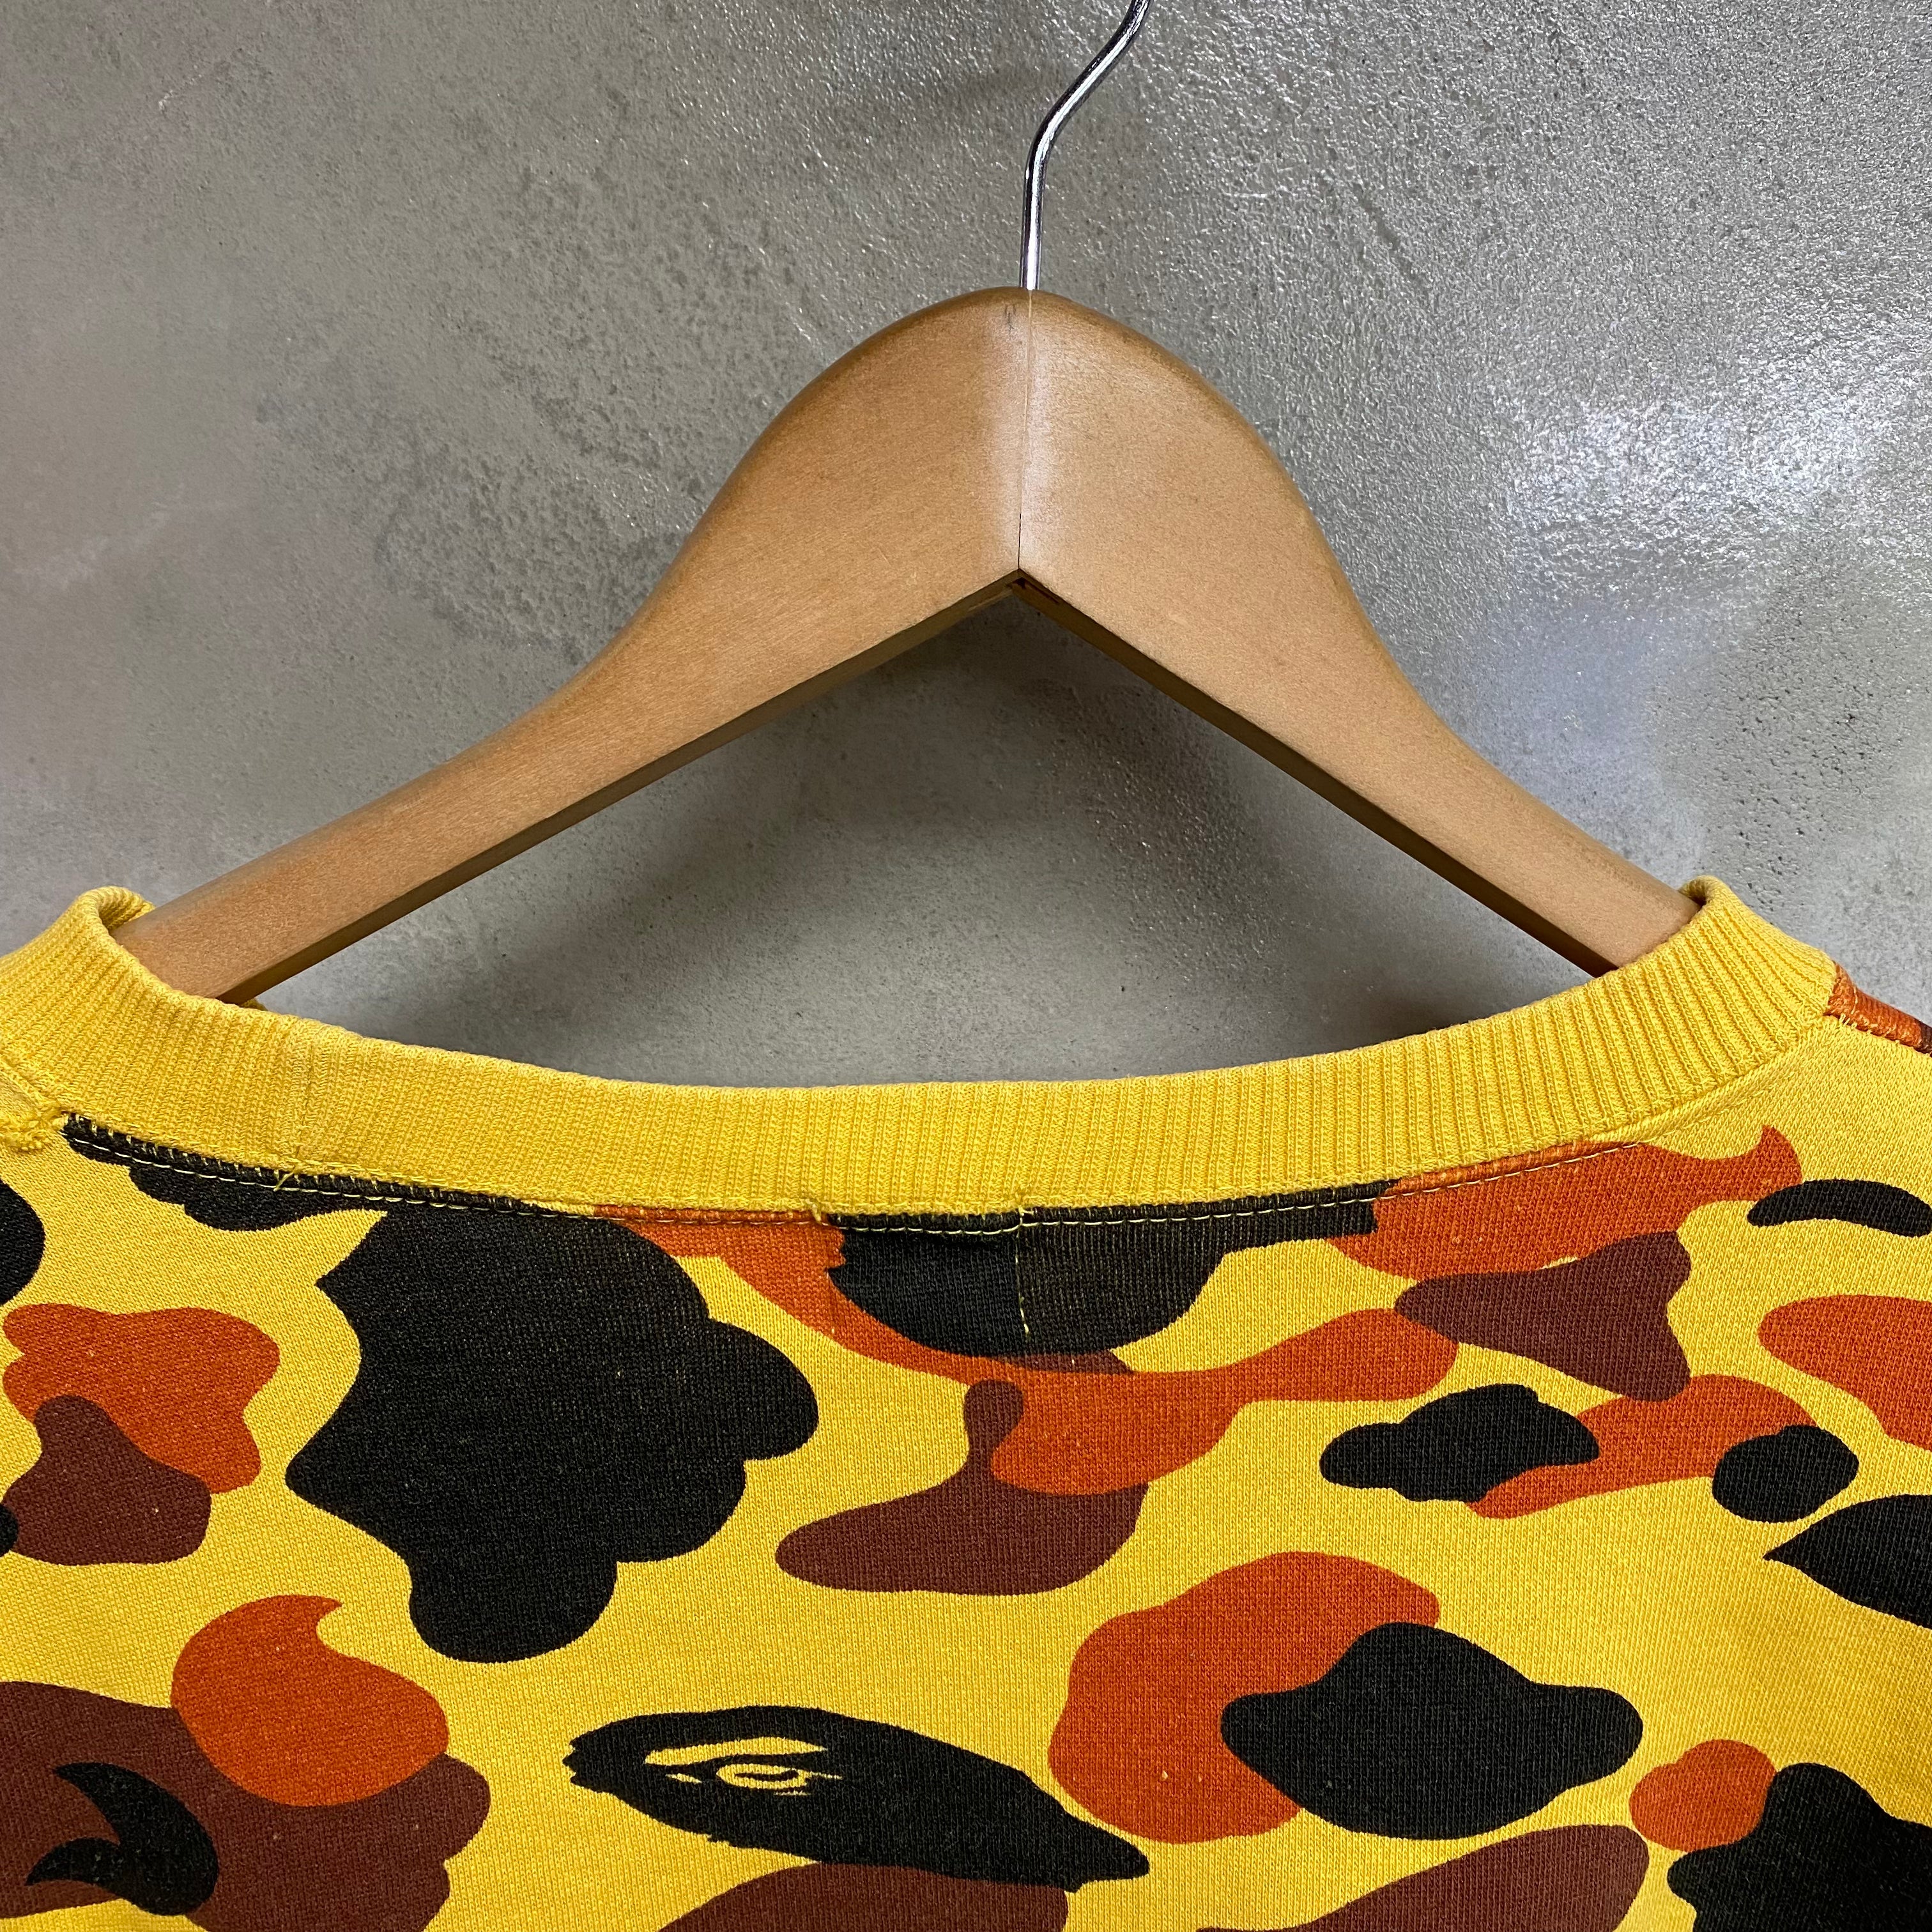 [ USED ] A BATHING APE SWEAT SHIRT ‘ 1st CAMO YELLOW ’ / STREET ARCHIVE PIECES